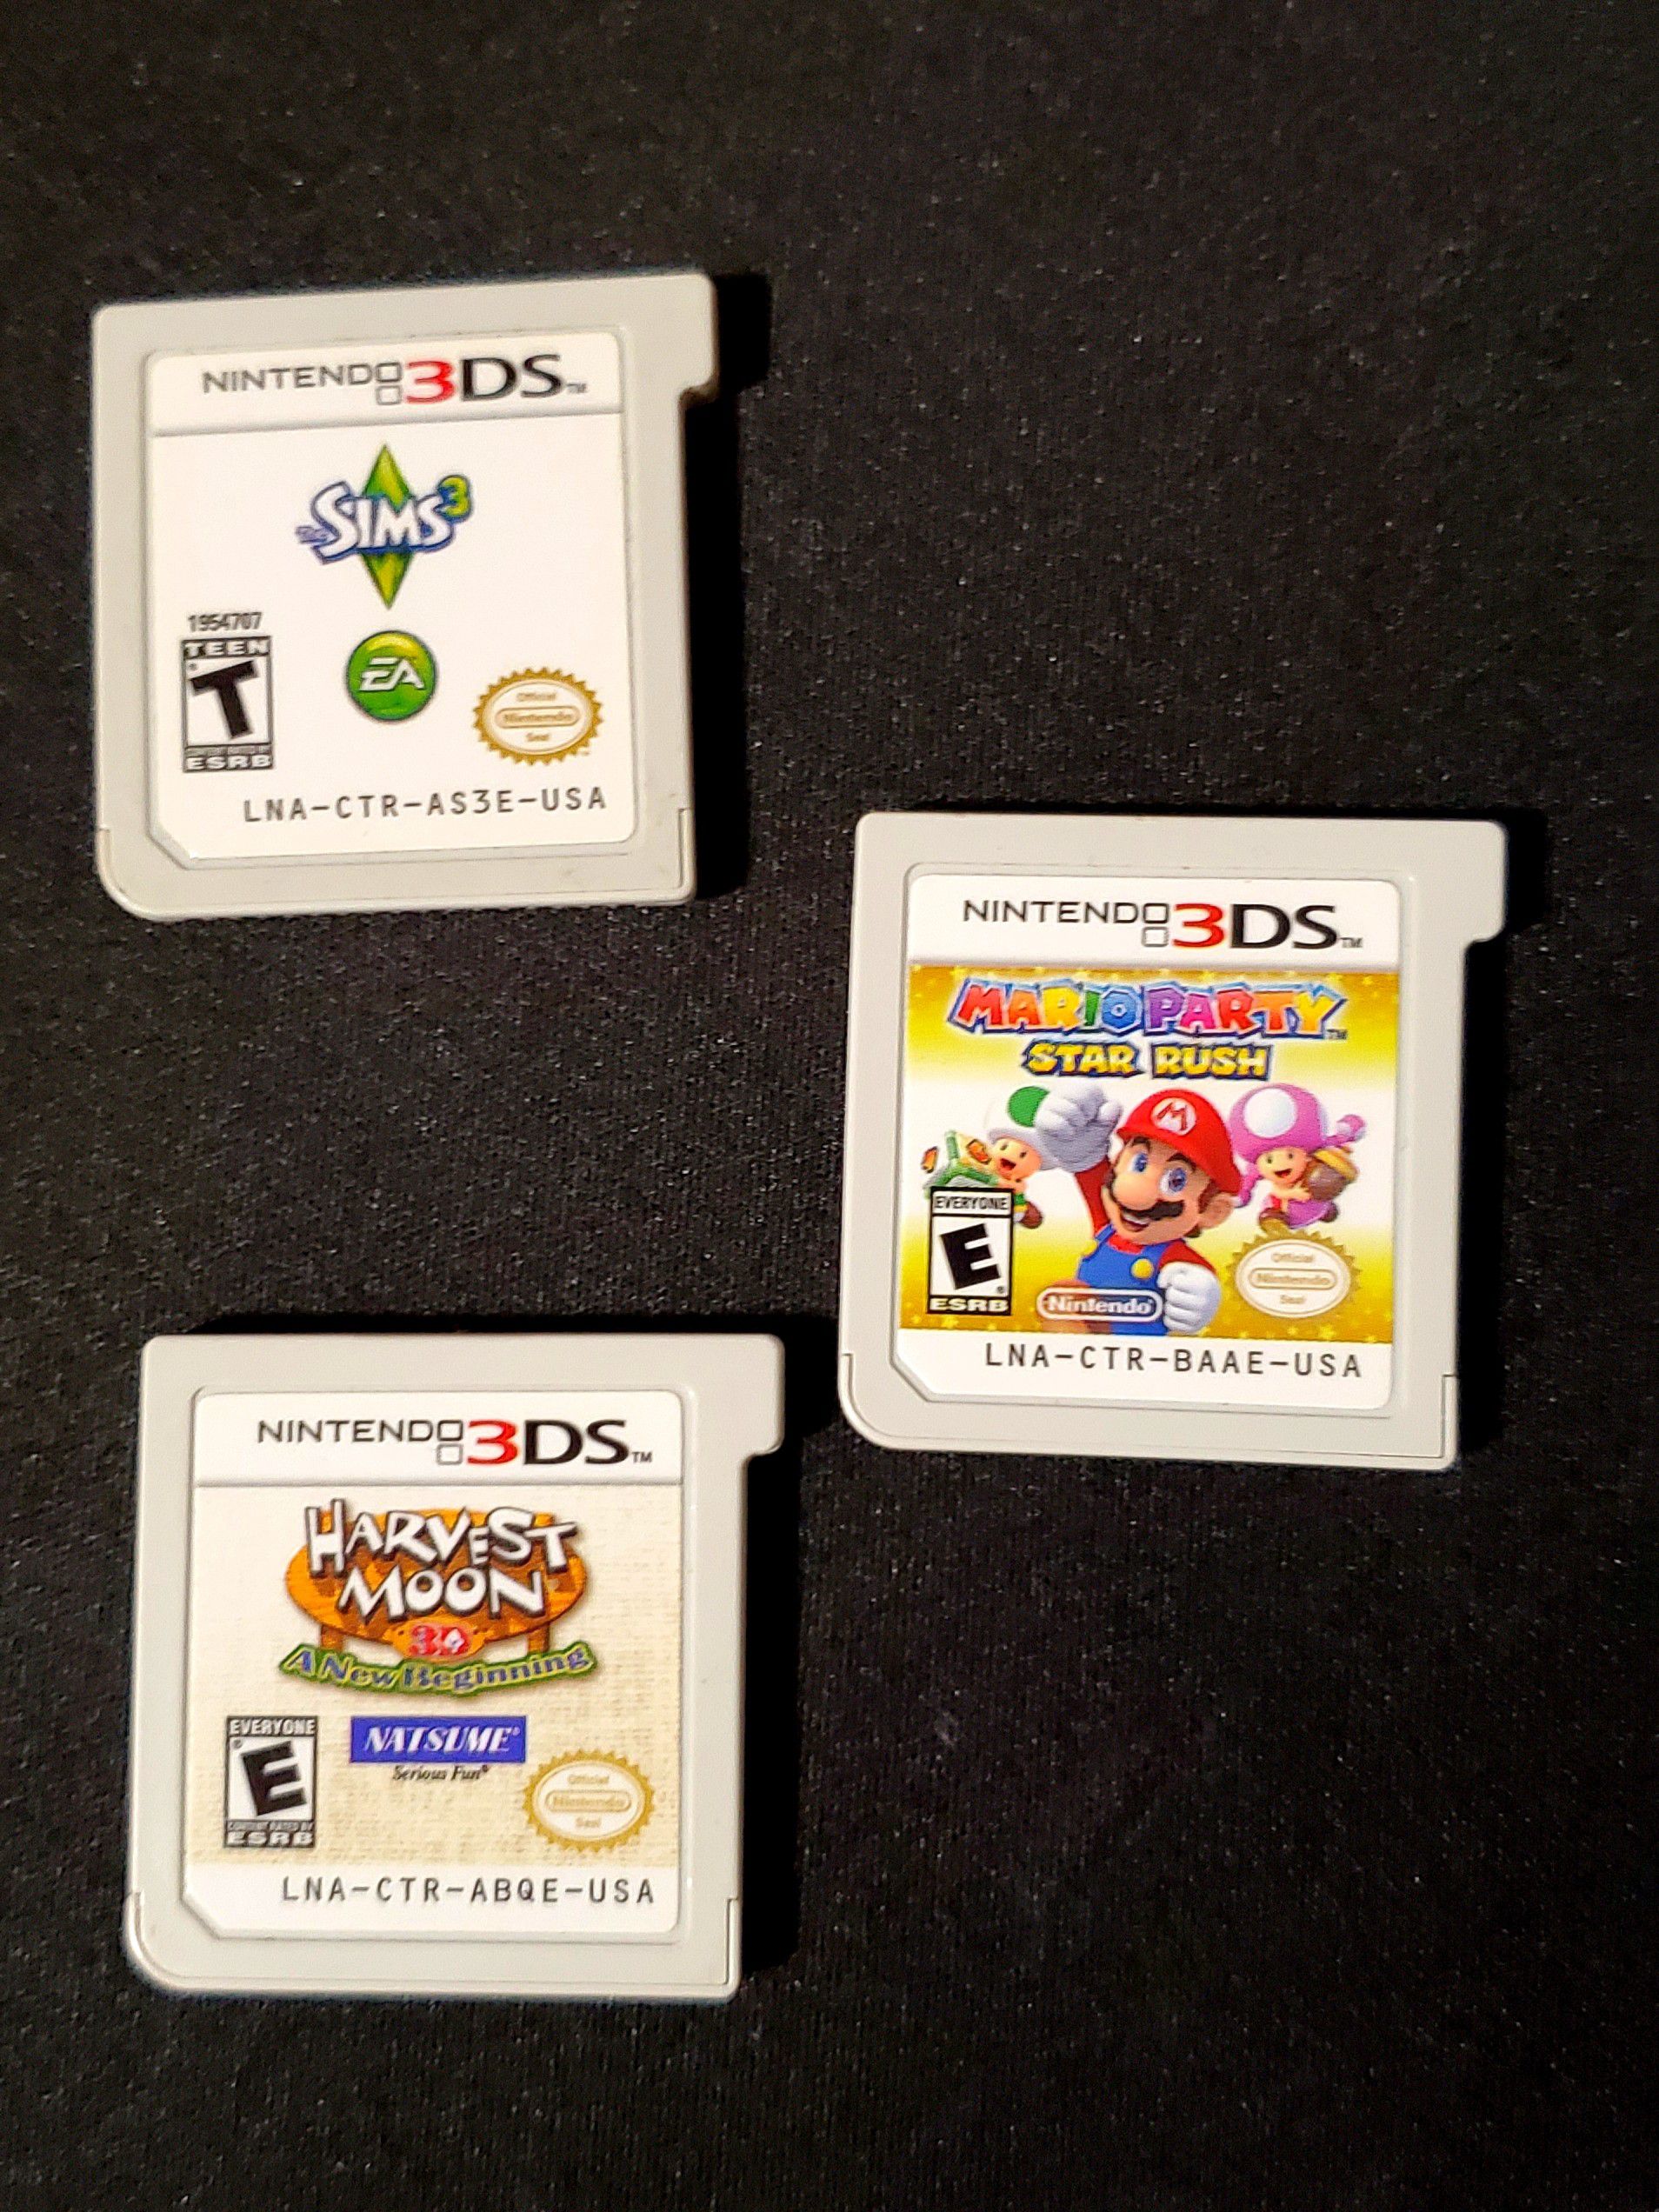 The Sims, Mario Party, Harvest moon bundle